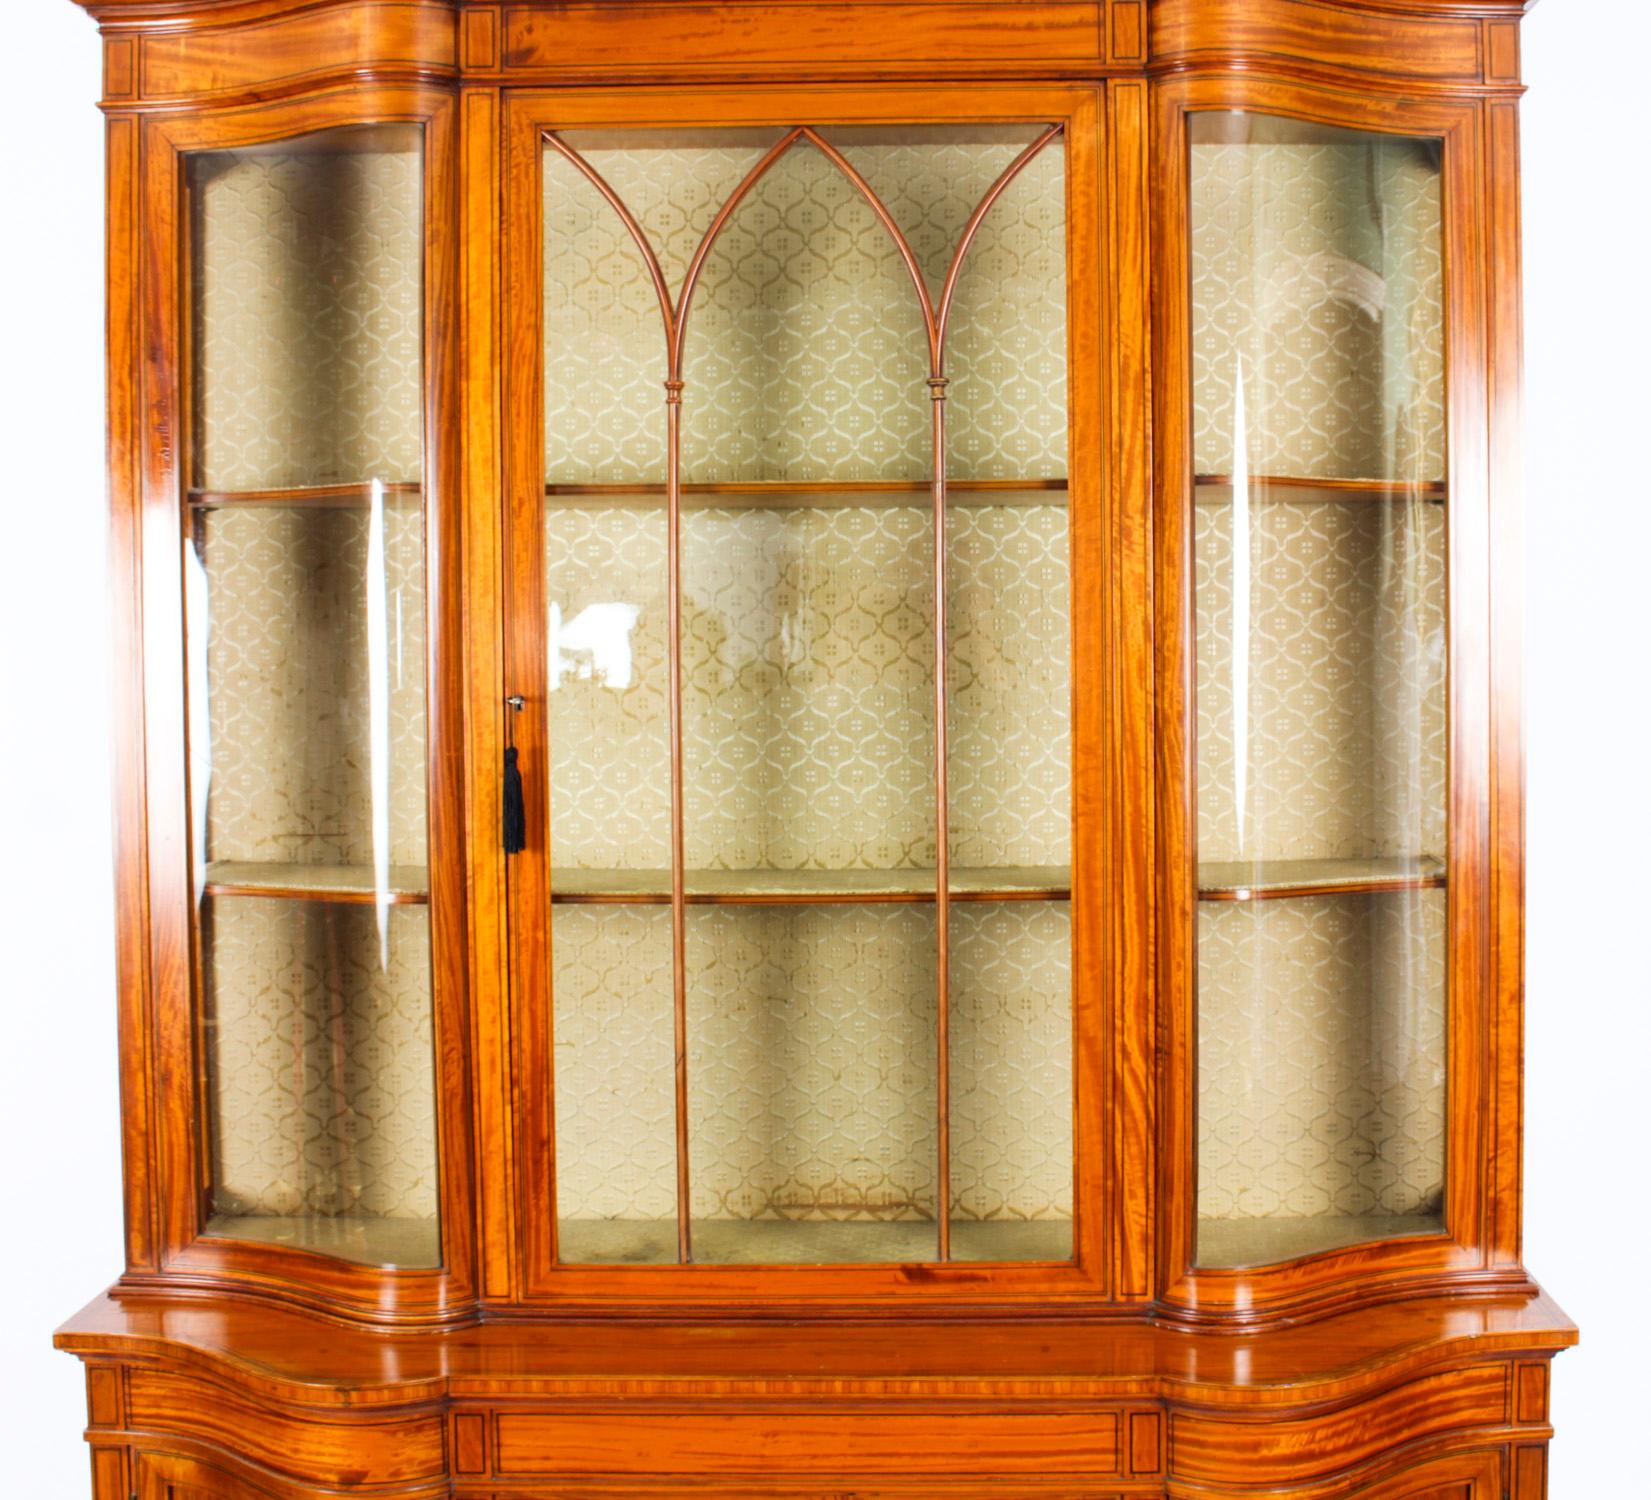 Antique Edwardian Serpentine Satinwood Inlaid Display Cabinet 19th C For Sale 5